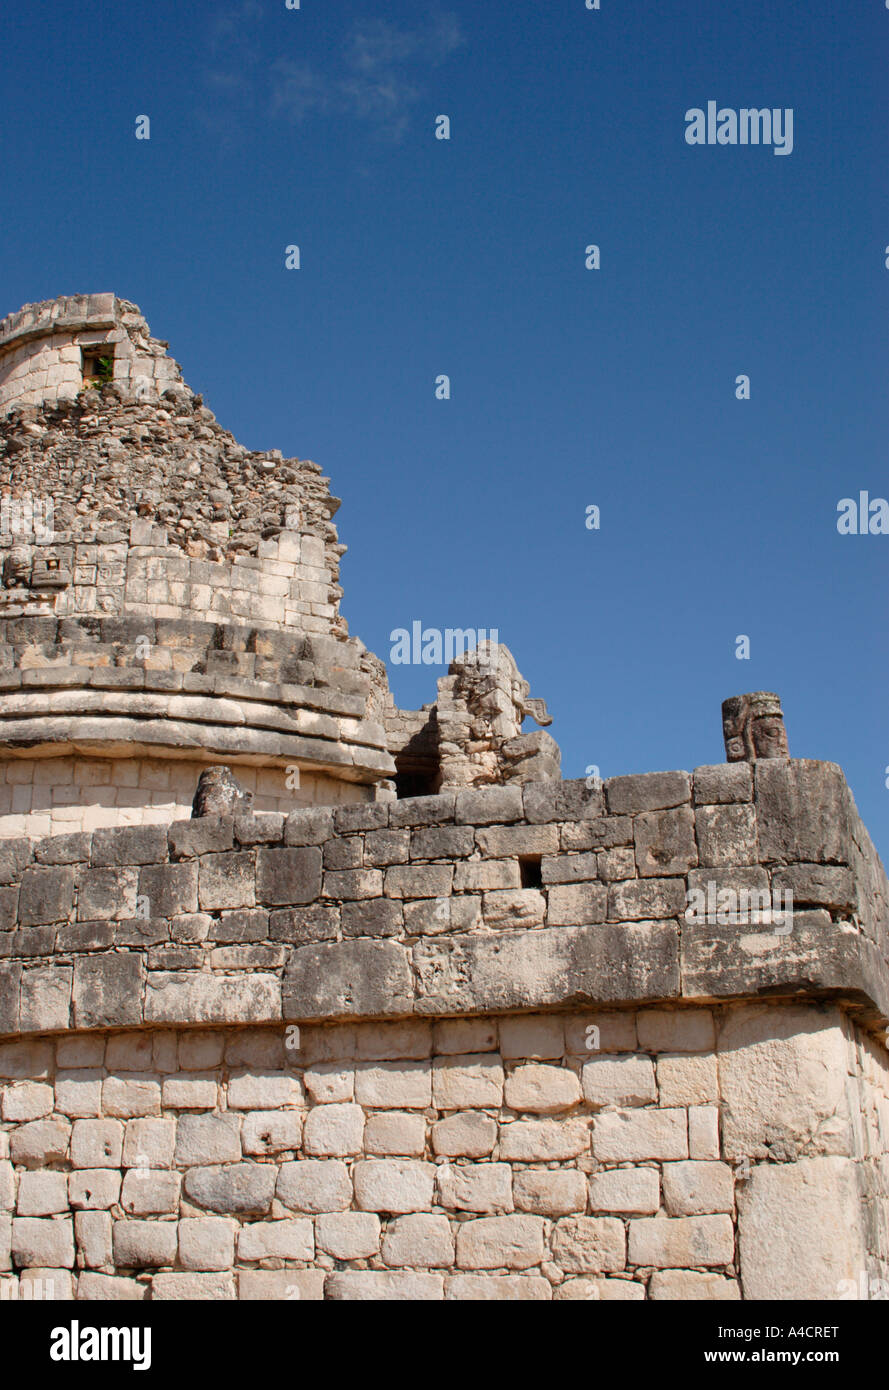 Chitzen Itza's Caracol, commonly called the Observatory, has alignment for observing the moon, Venus, and significant stars. Stock Photo